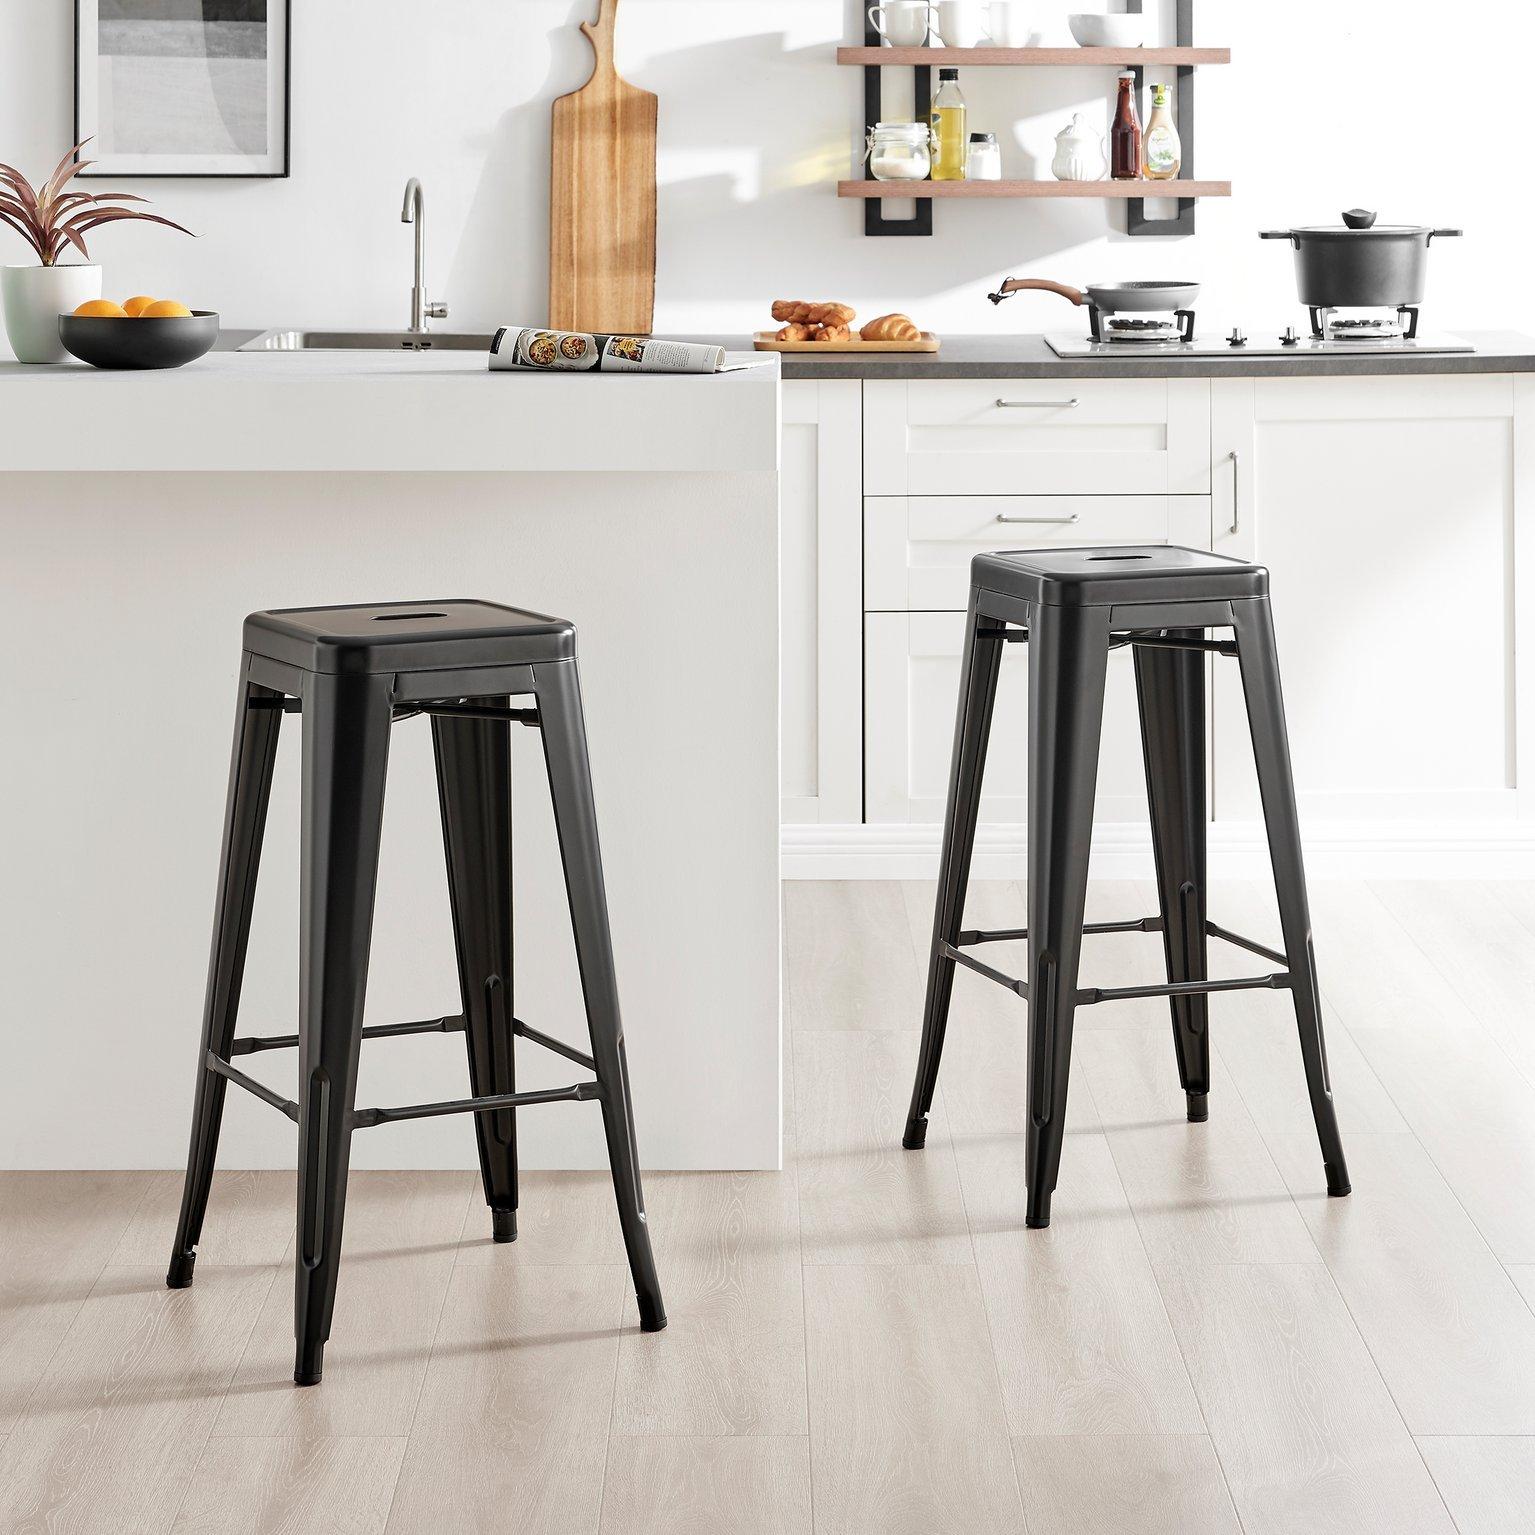 Set of 2 Colton 'Tolix' Style Metal Stackable Retro Industrial Bar Stools